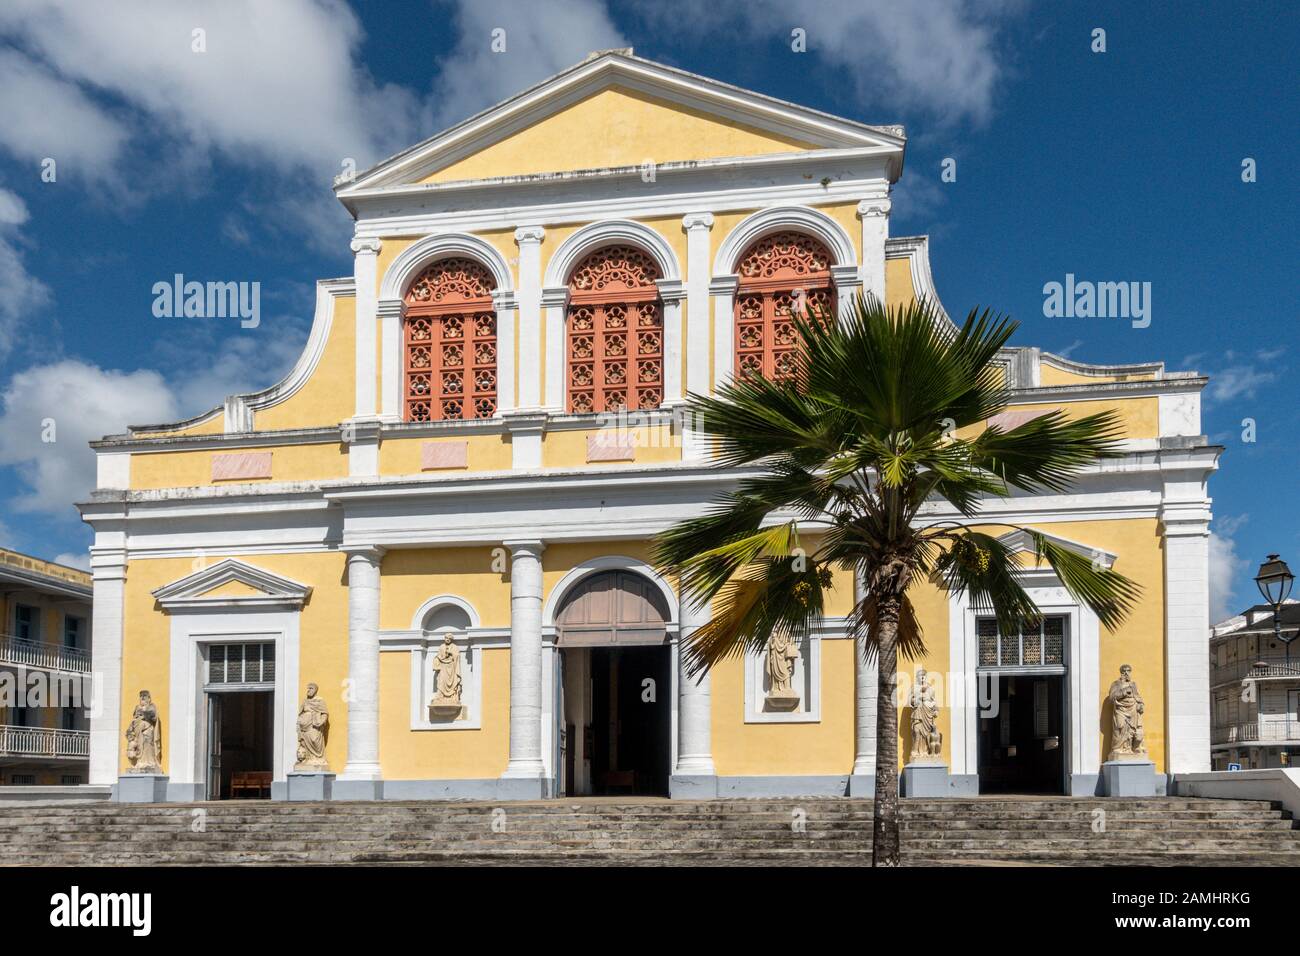 Catholic Church of St. Peter and St. Paul, locally known as Cathedral, Pointe-a-Pitre, Guadeloupe, West Indies, Caribbean Stock Photo